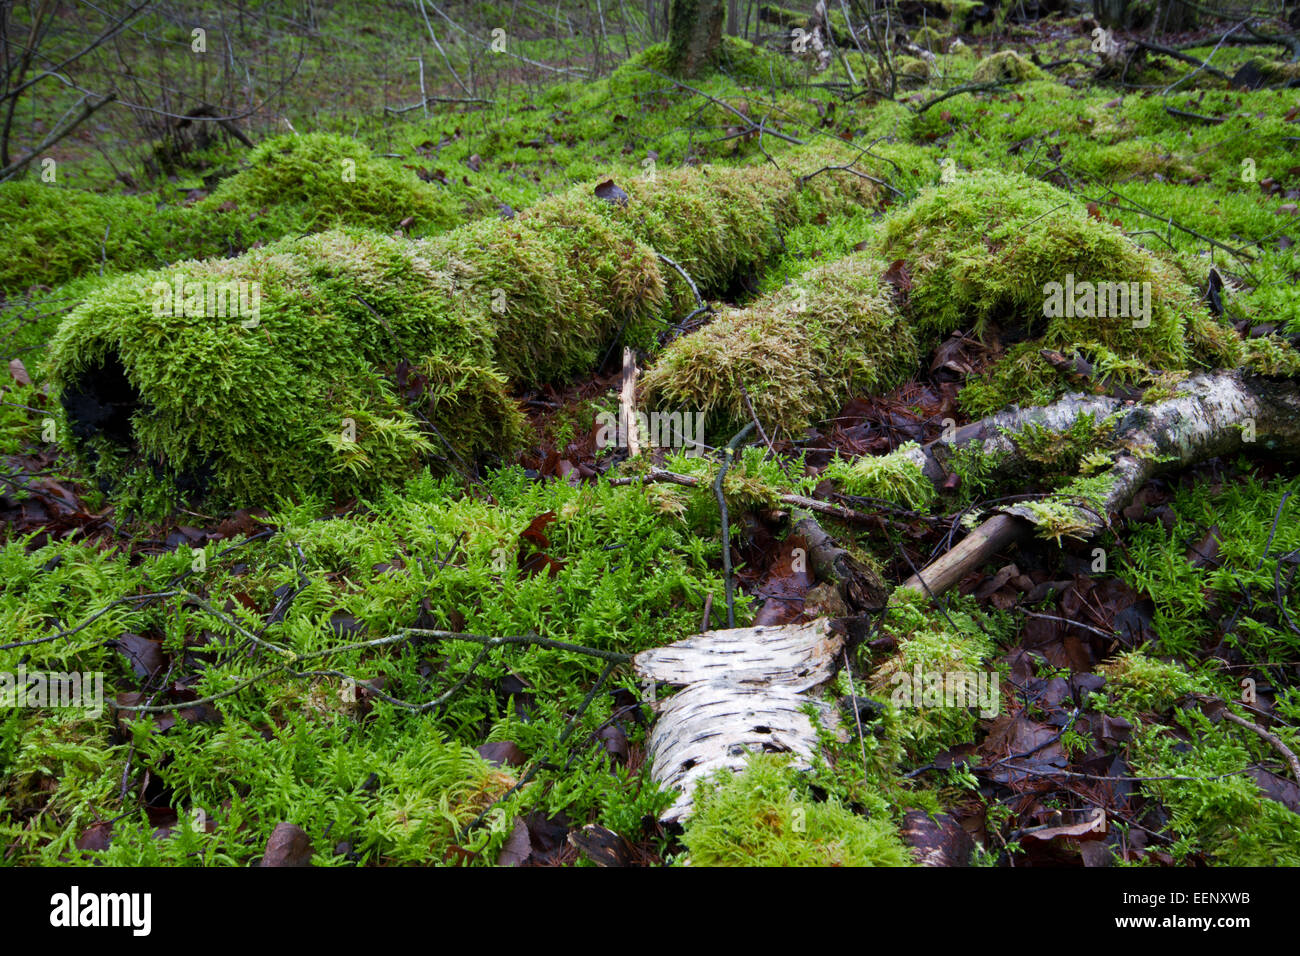 Moss overgrowing dead, rotting trees in a moist forest Stock Photo